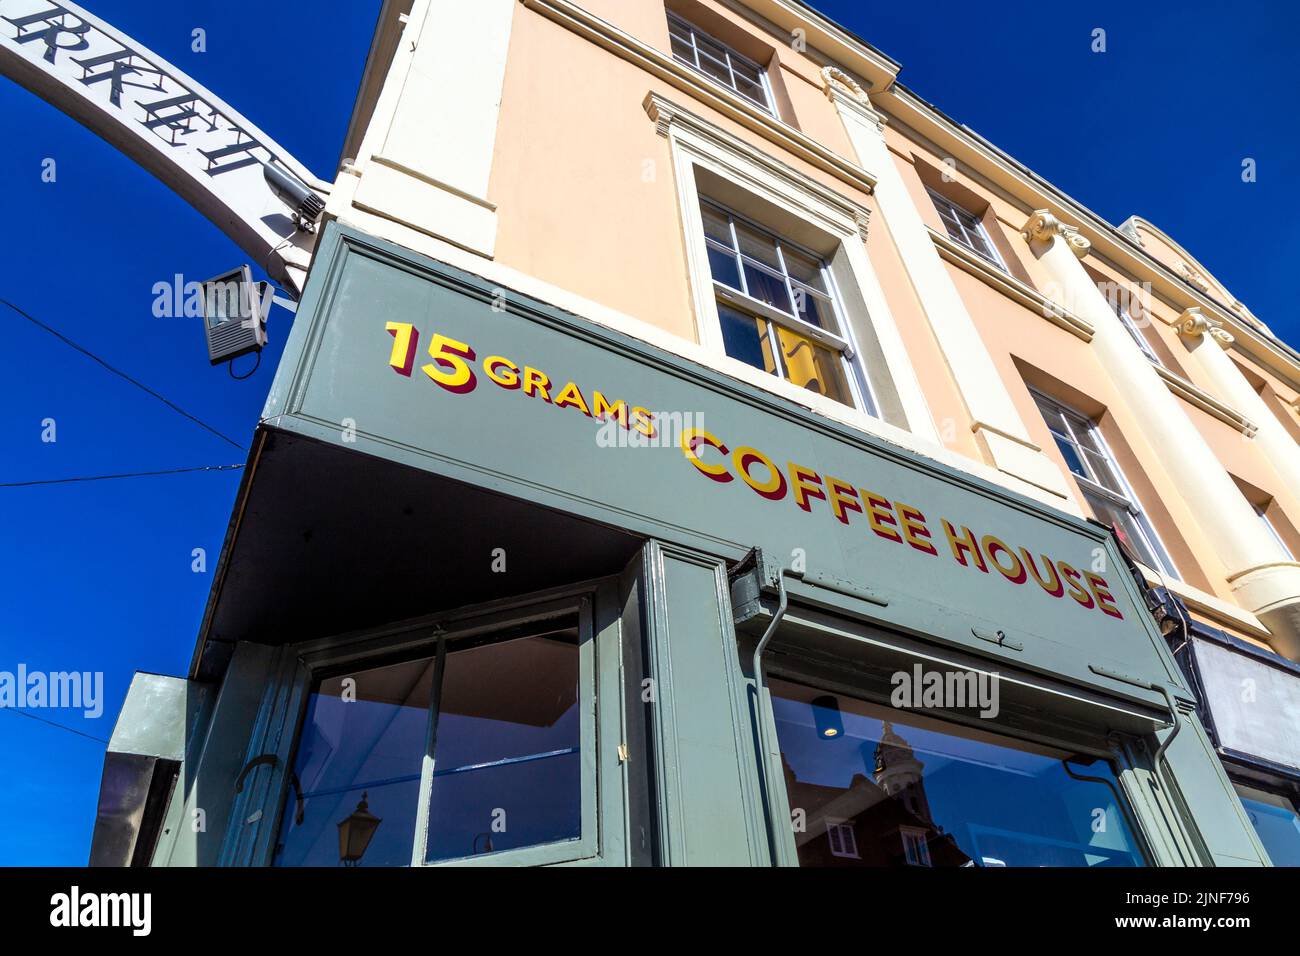 Exterior of 15Grams Coffee House, Greenwich, London, UK Stock Photo